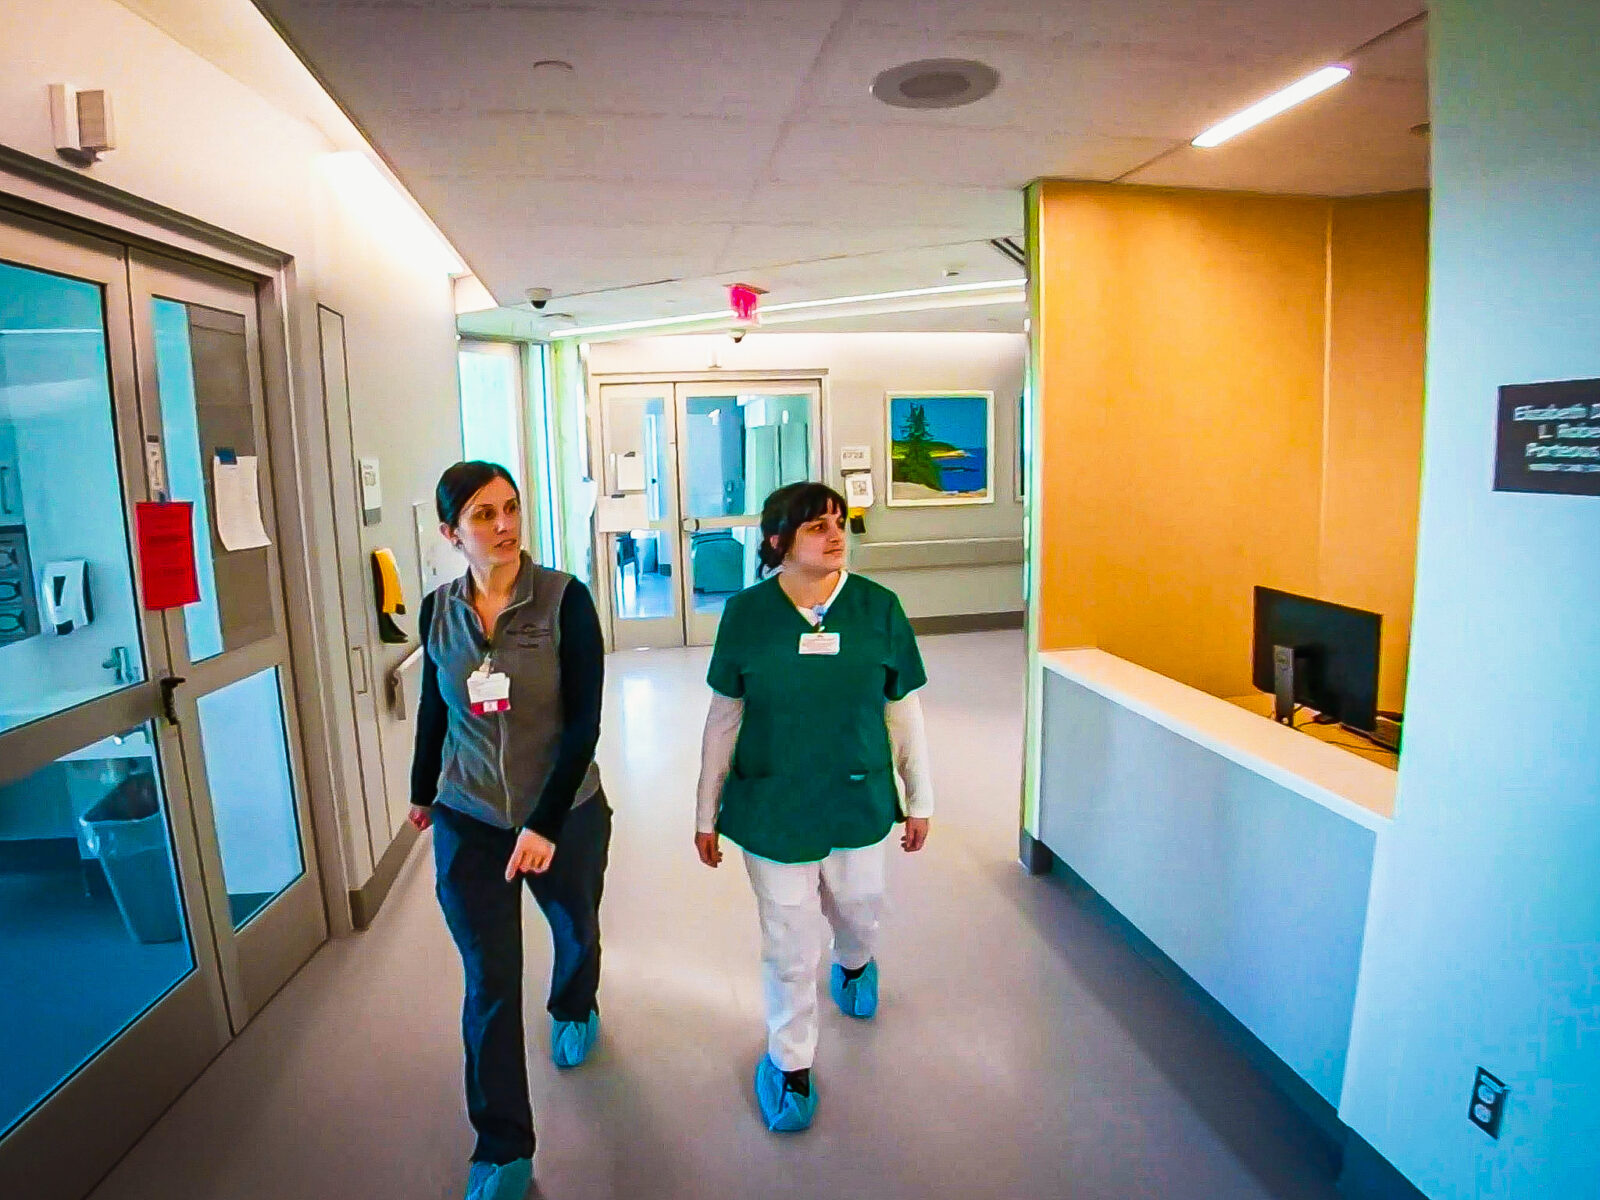 Workers from Maine Medical Center walking through a hallway